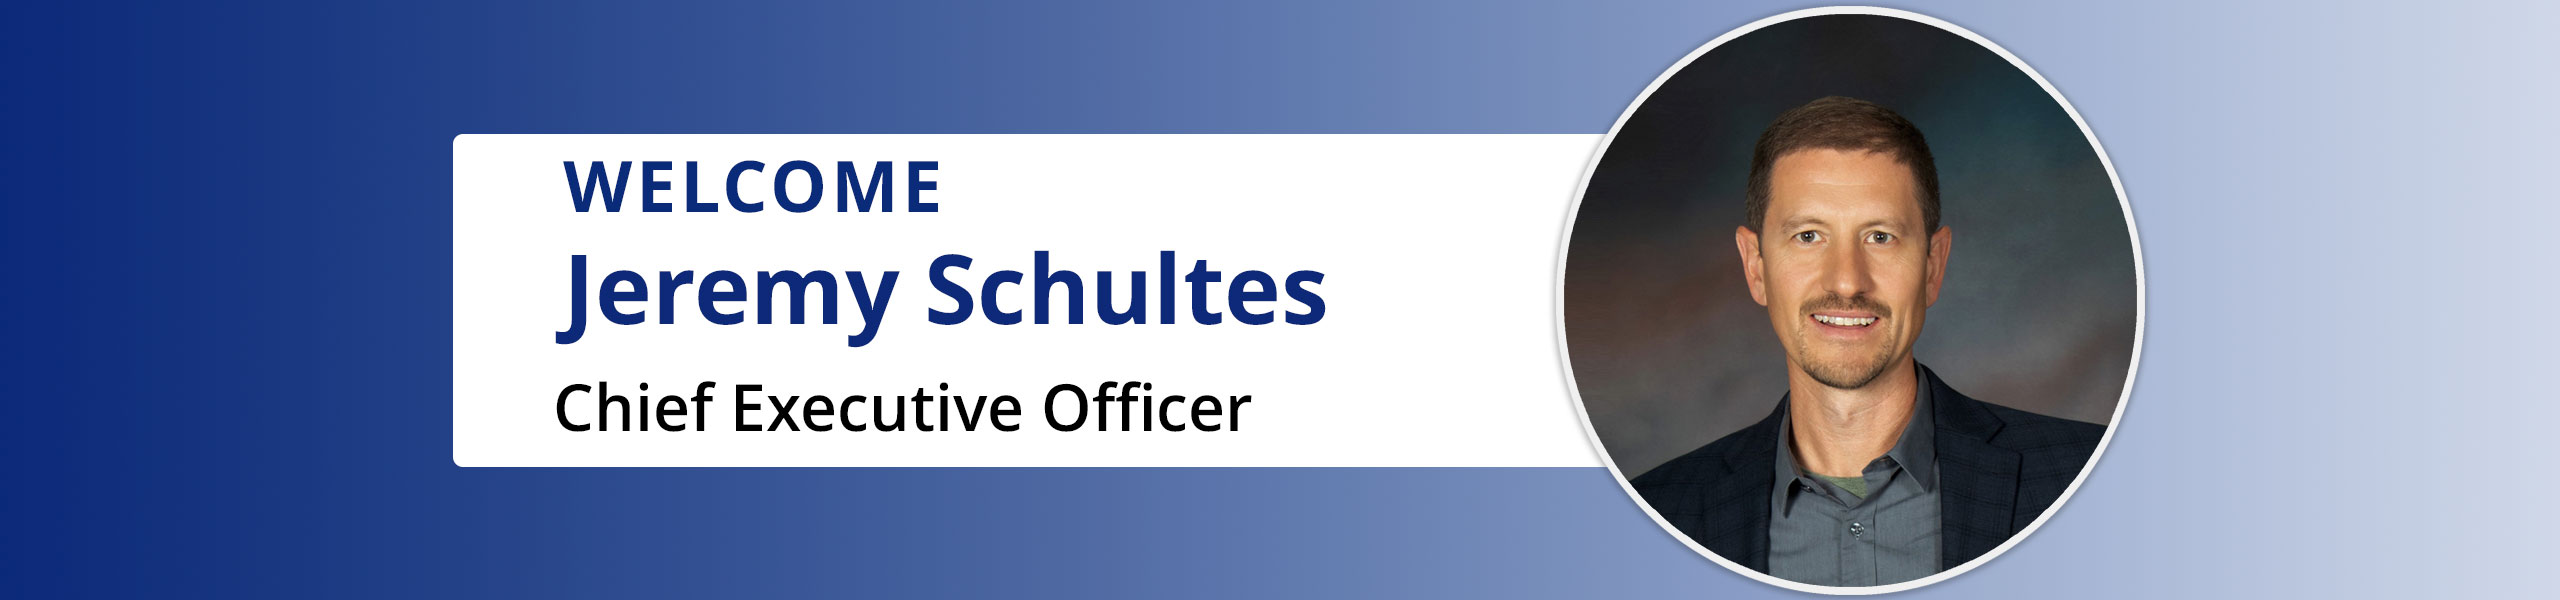 Welcome Jeremy Schultes
Chief Executive Officer